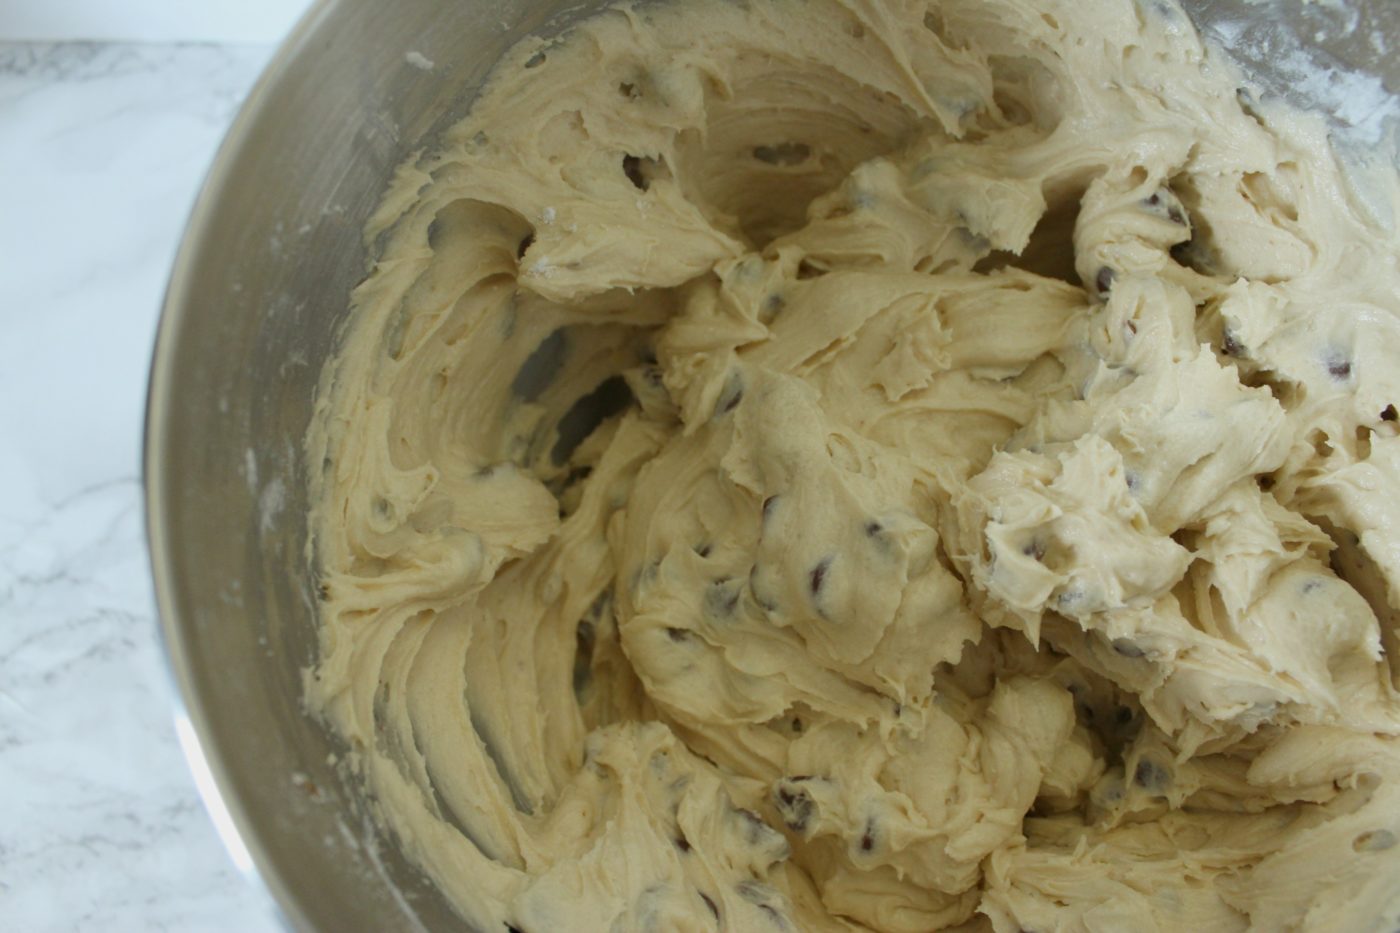 The secret to this cookie dough is letting it sit overnight in the fridge. I know, sounds difficult but you can do it. The results will be worth it.